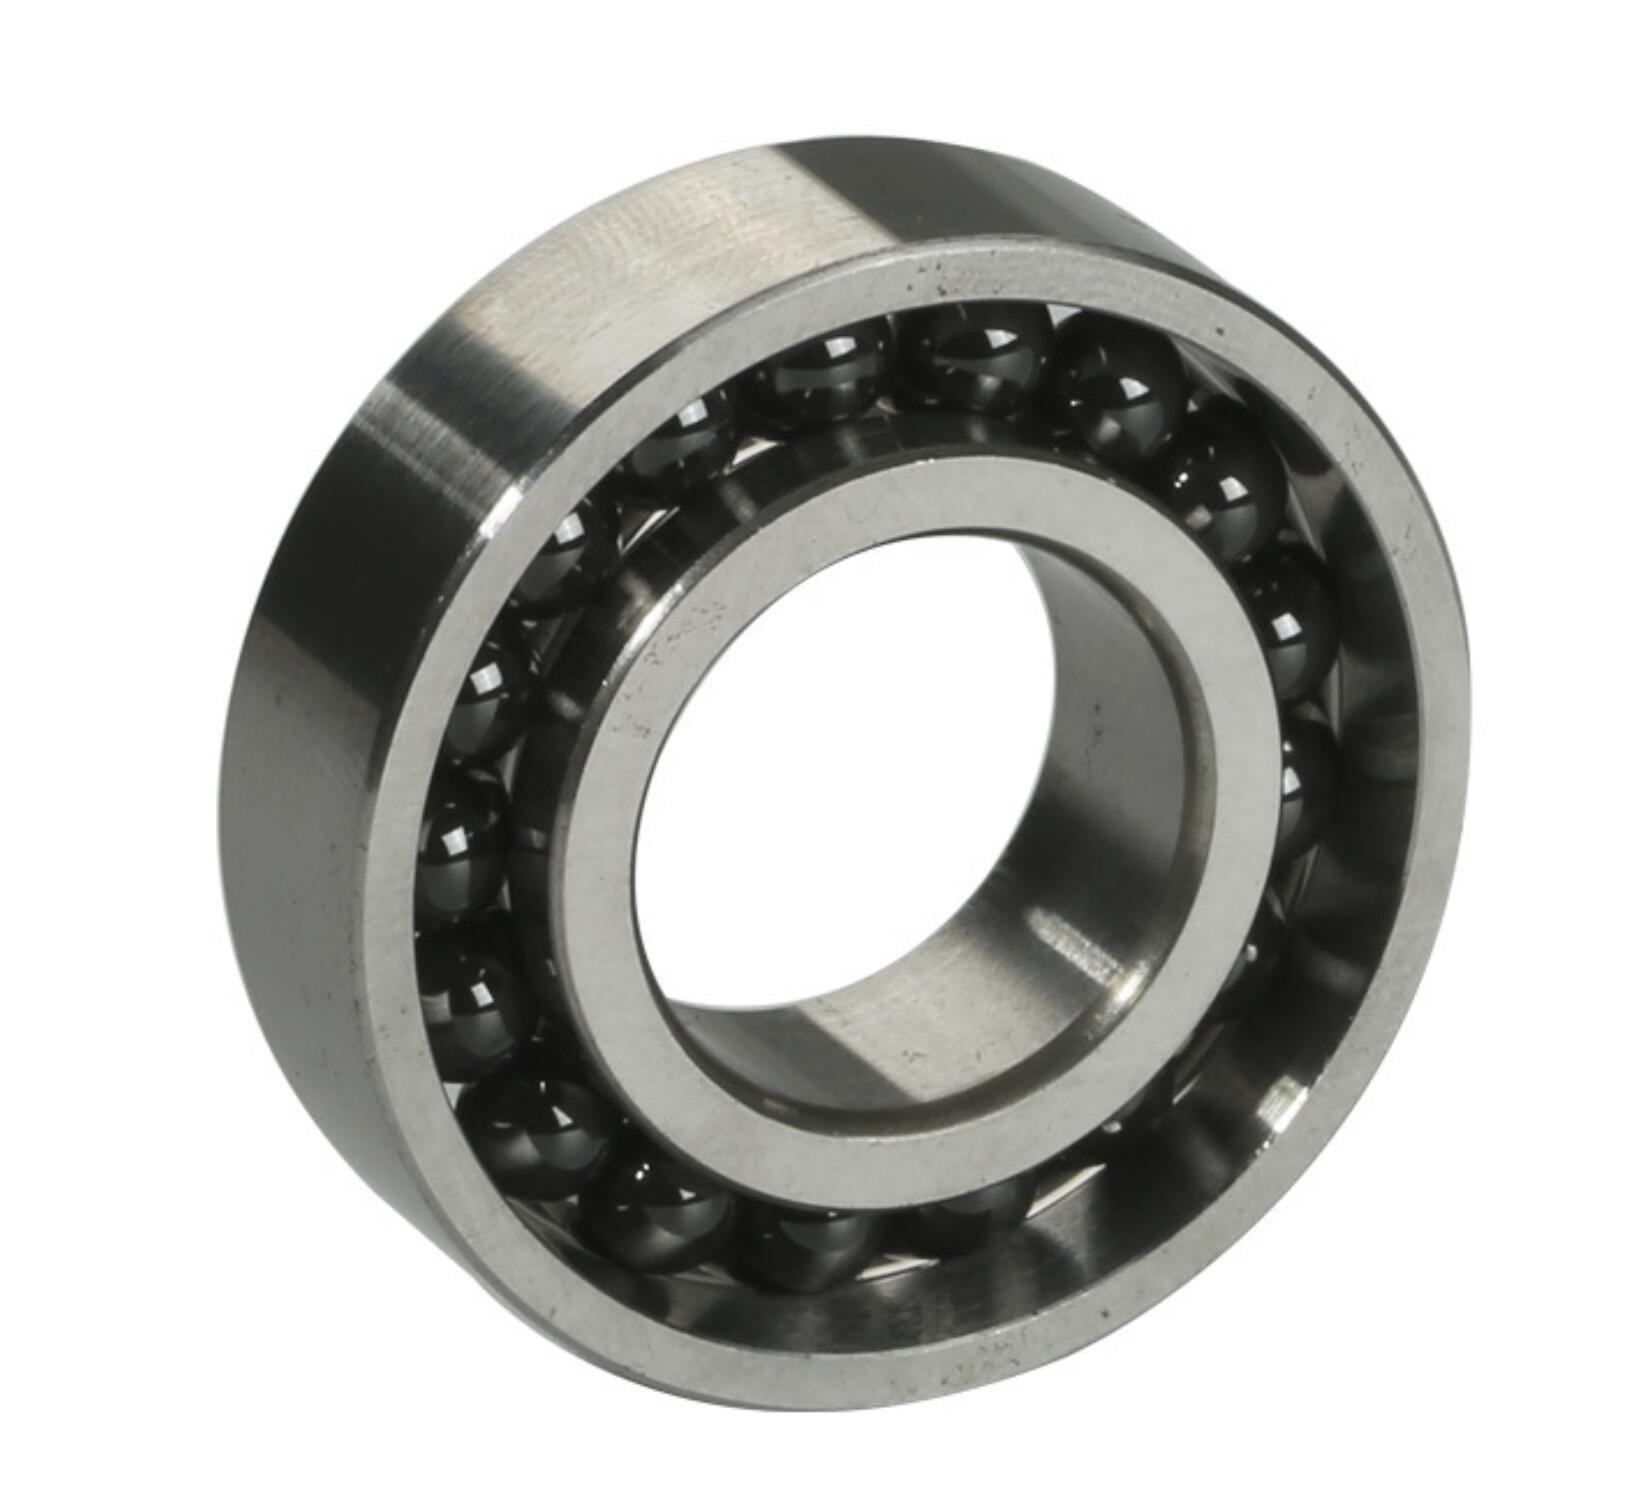 Thb Supper Precision Double Row Angular Contact Ball Bearing 3305 J